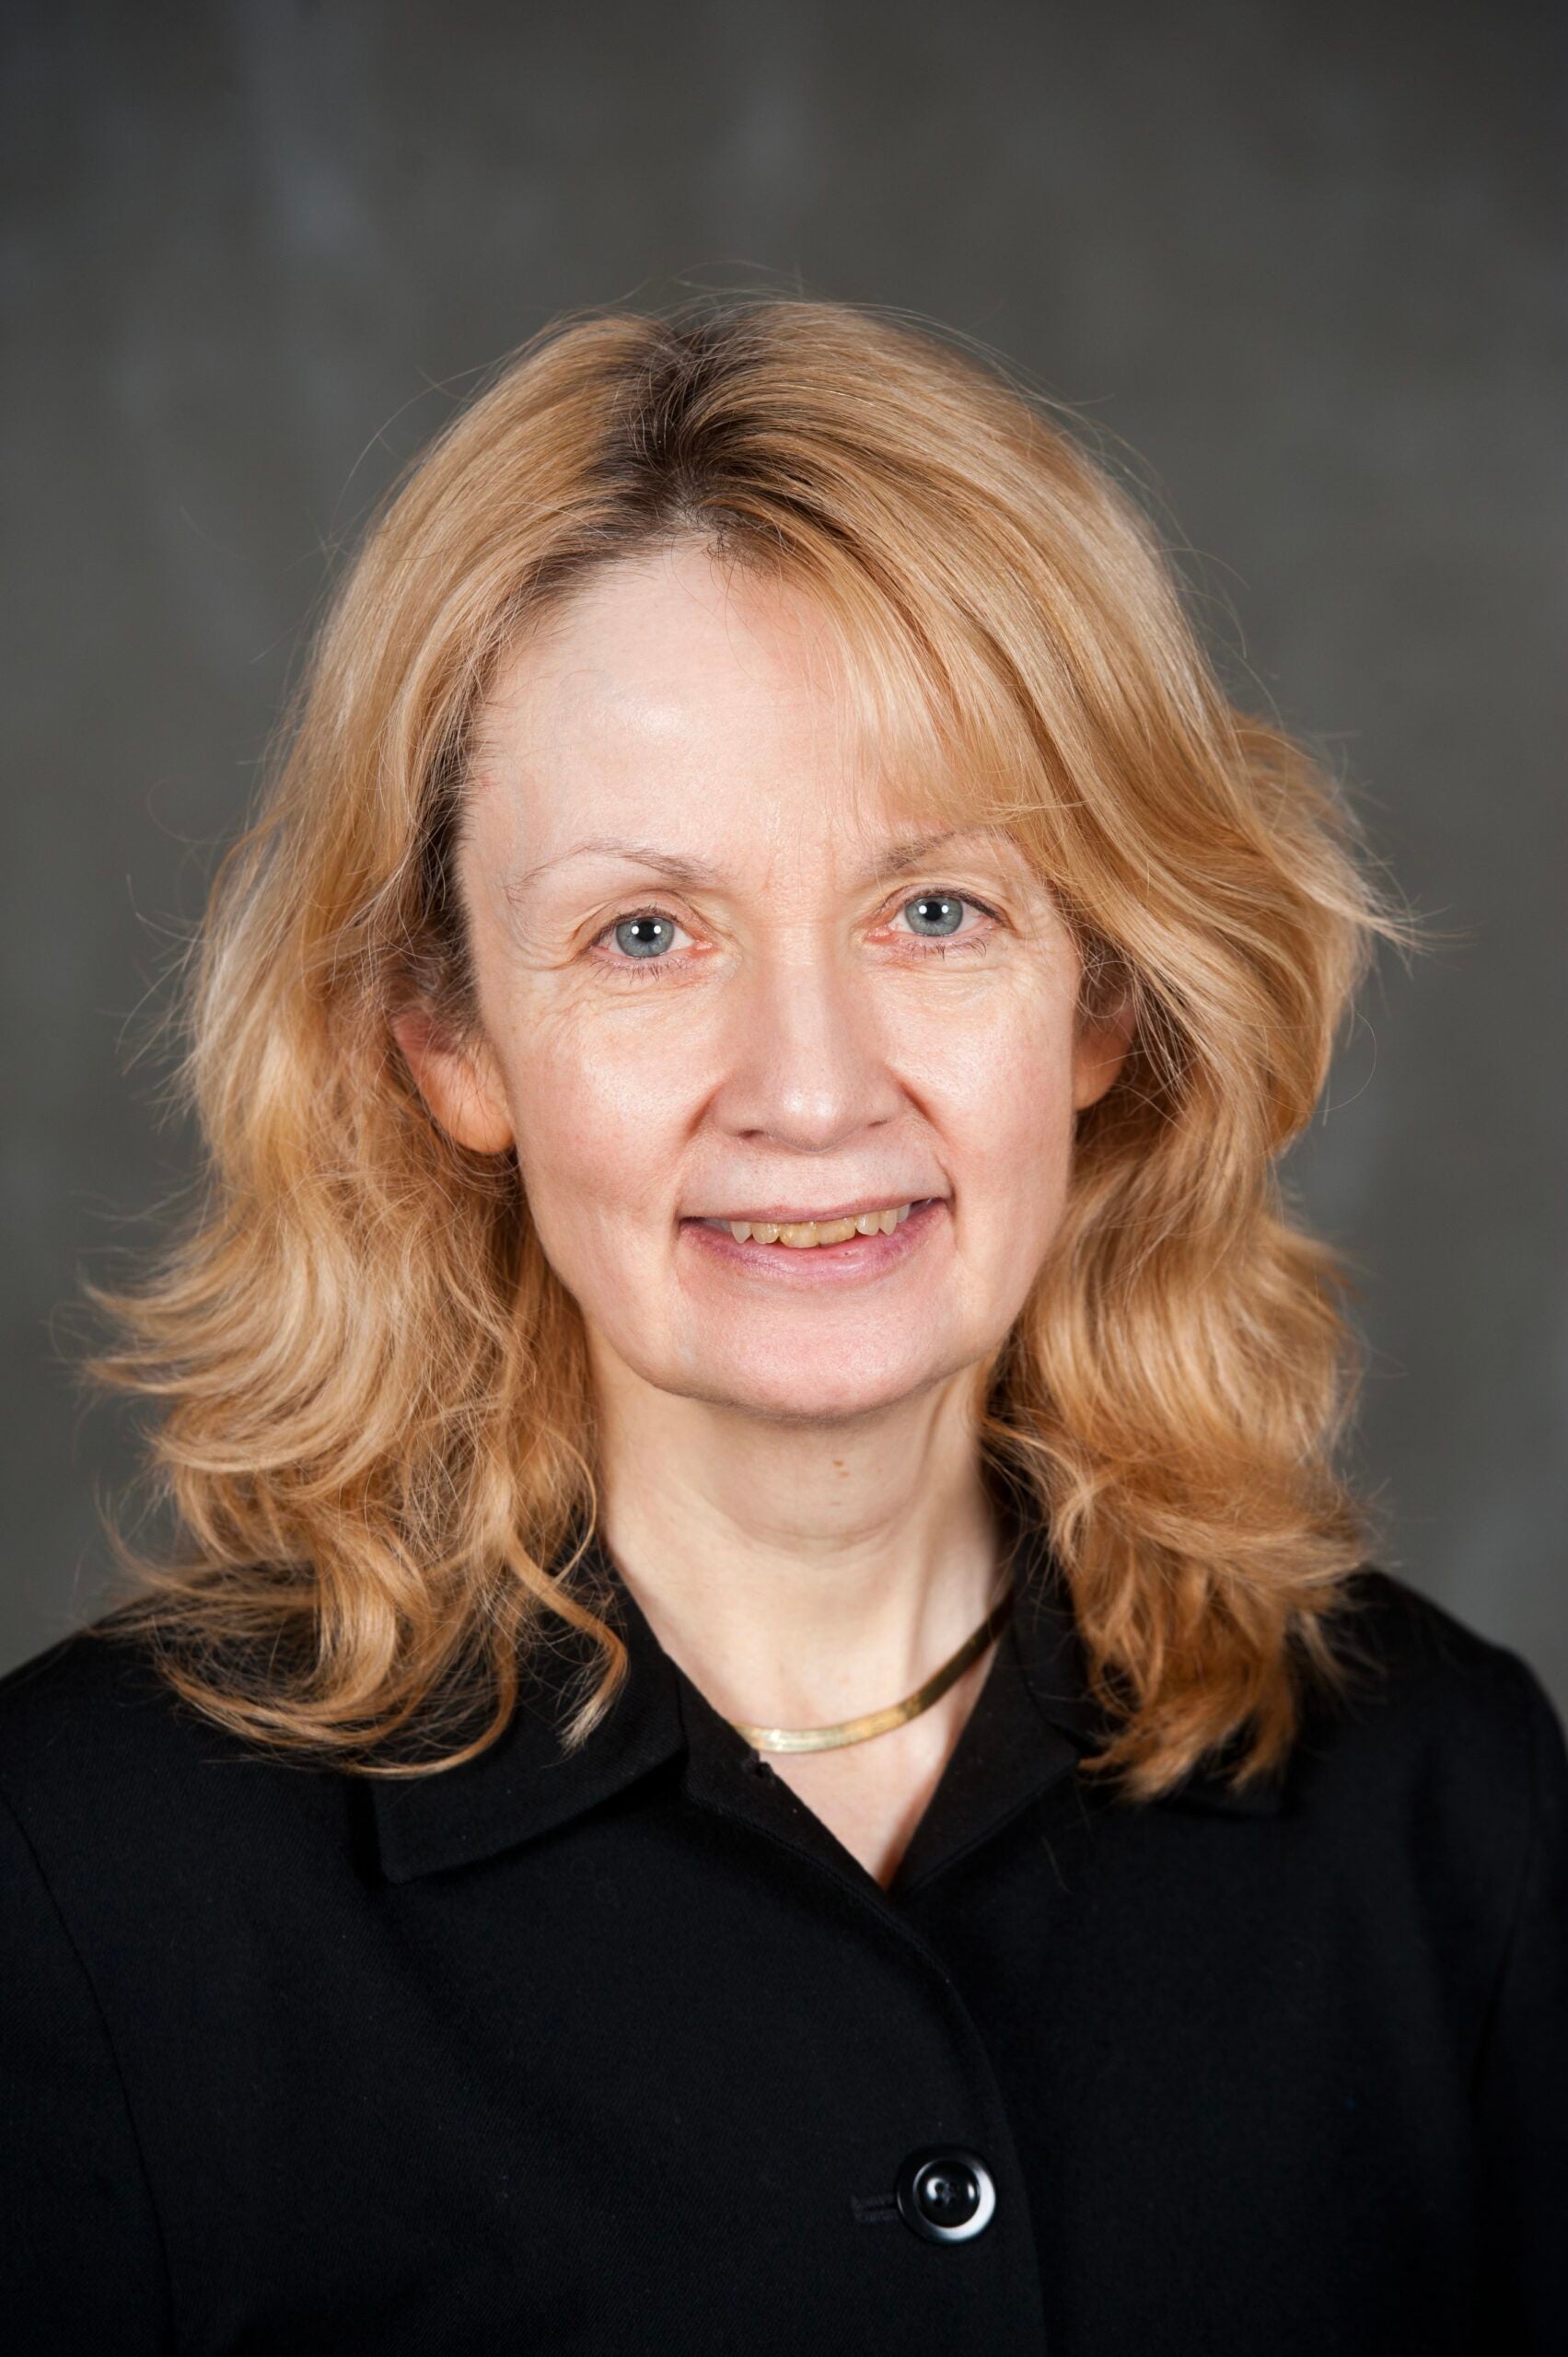 The woman in photo is Caucasian with blue eyes and blond hair. She wears a black suit and gold necklace and gentle smile.